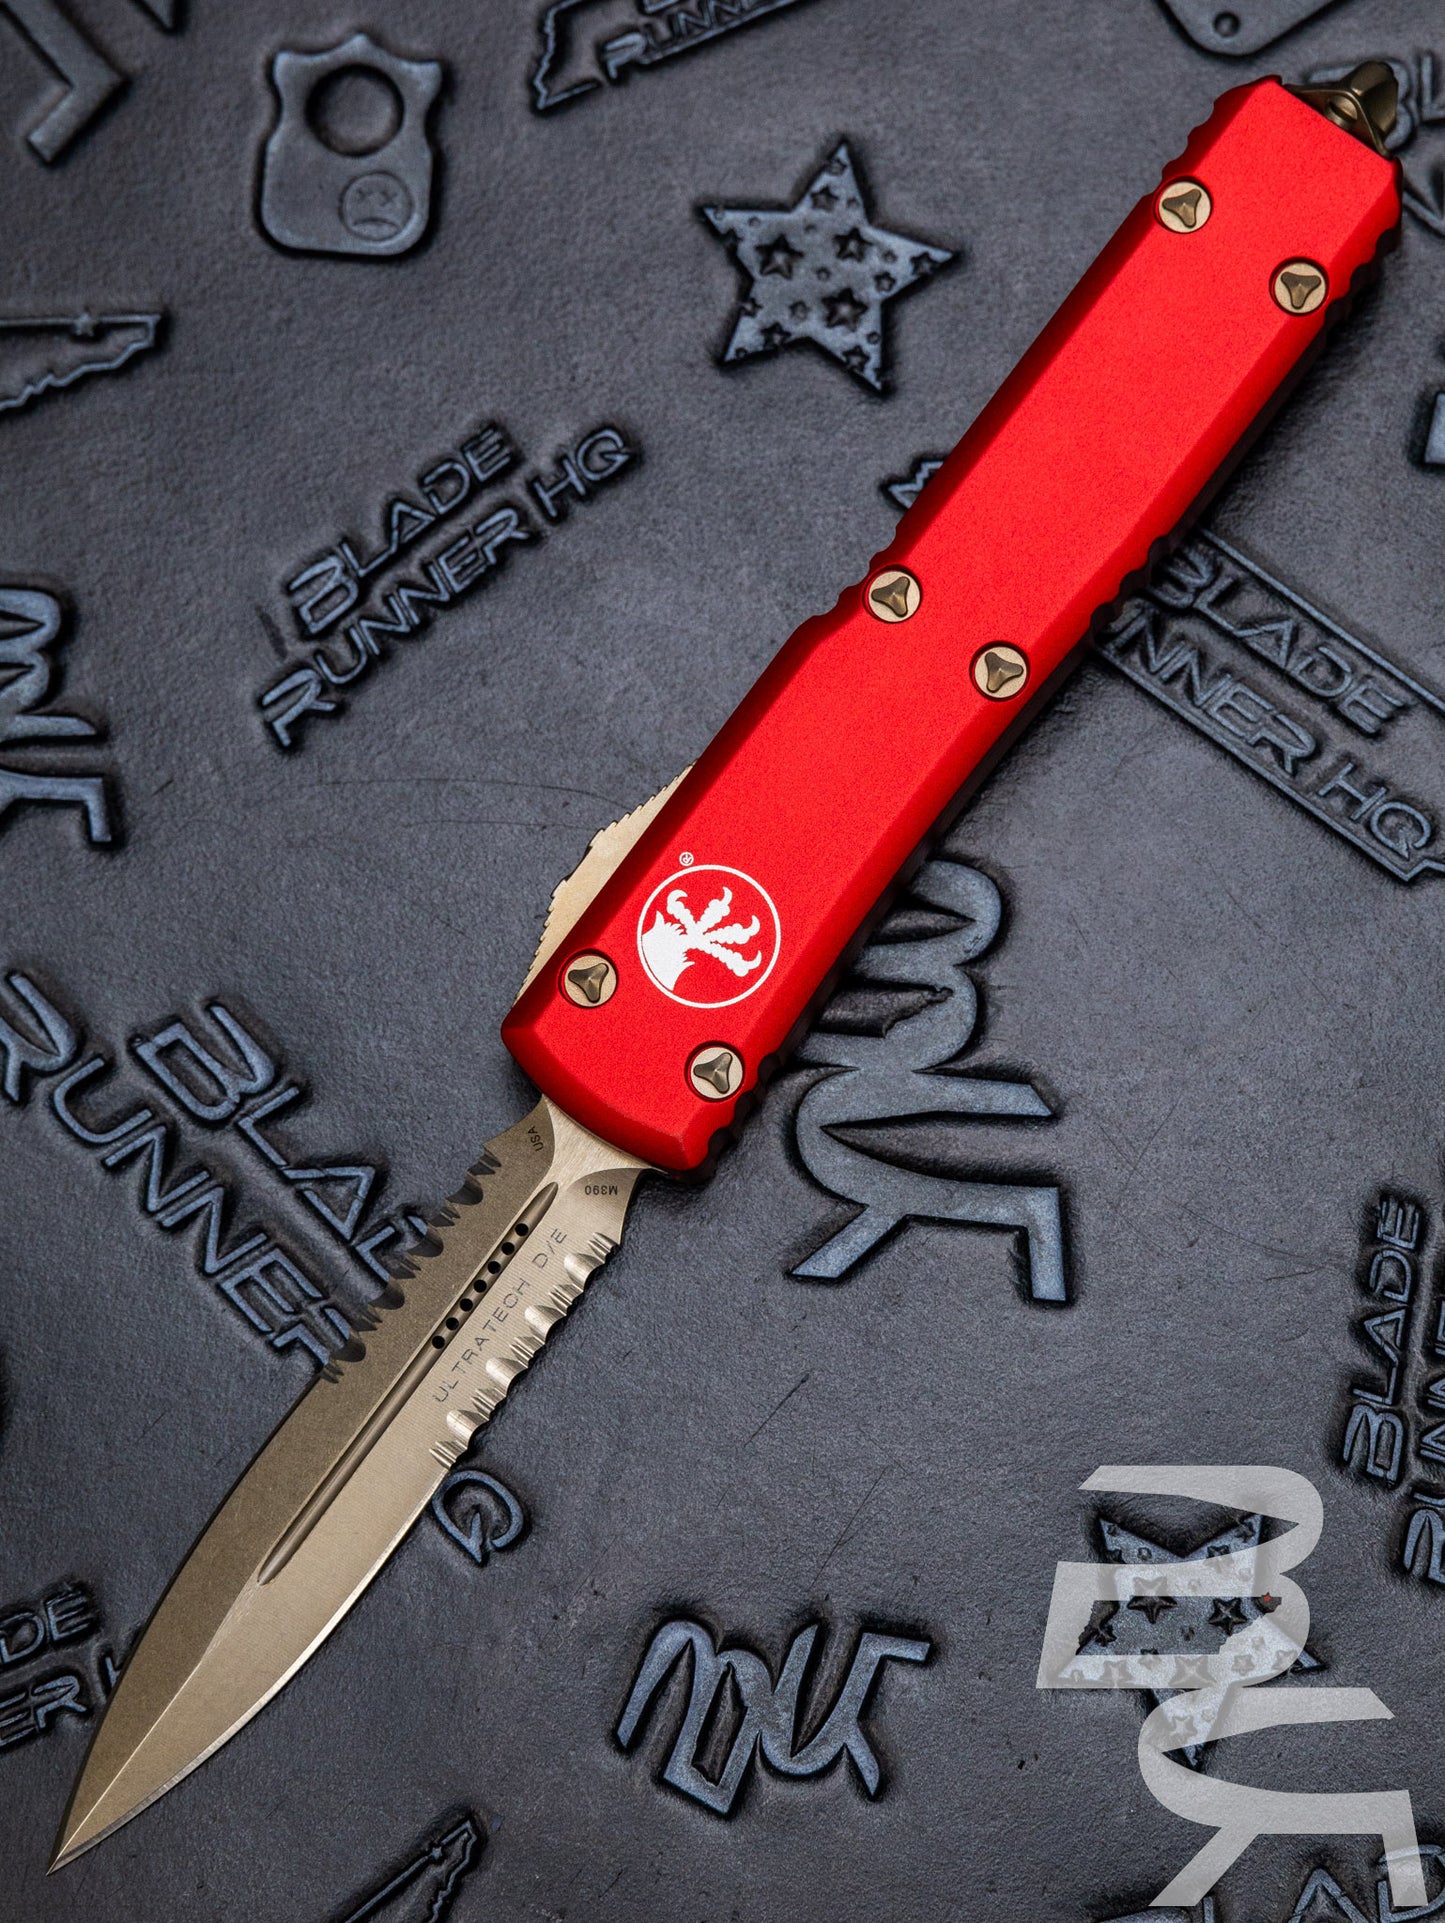 MICROTECH ULTRATECH OTF KNIFE- DOUBLE EDGE- RED HANDLE- BRONZED APOCALYPTIC PART SERRATED BLADE AND HARDWARE 122-14 RD